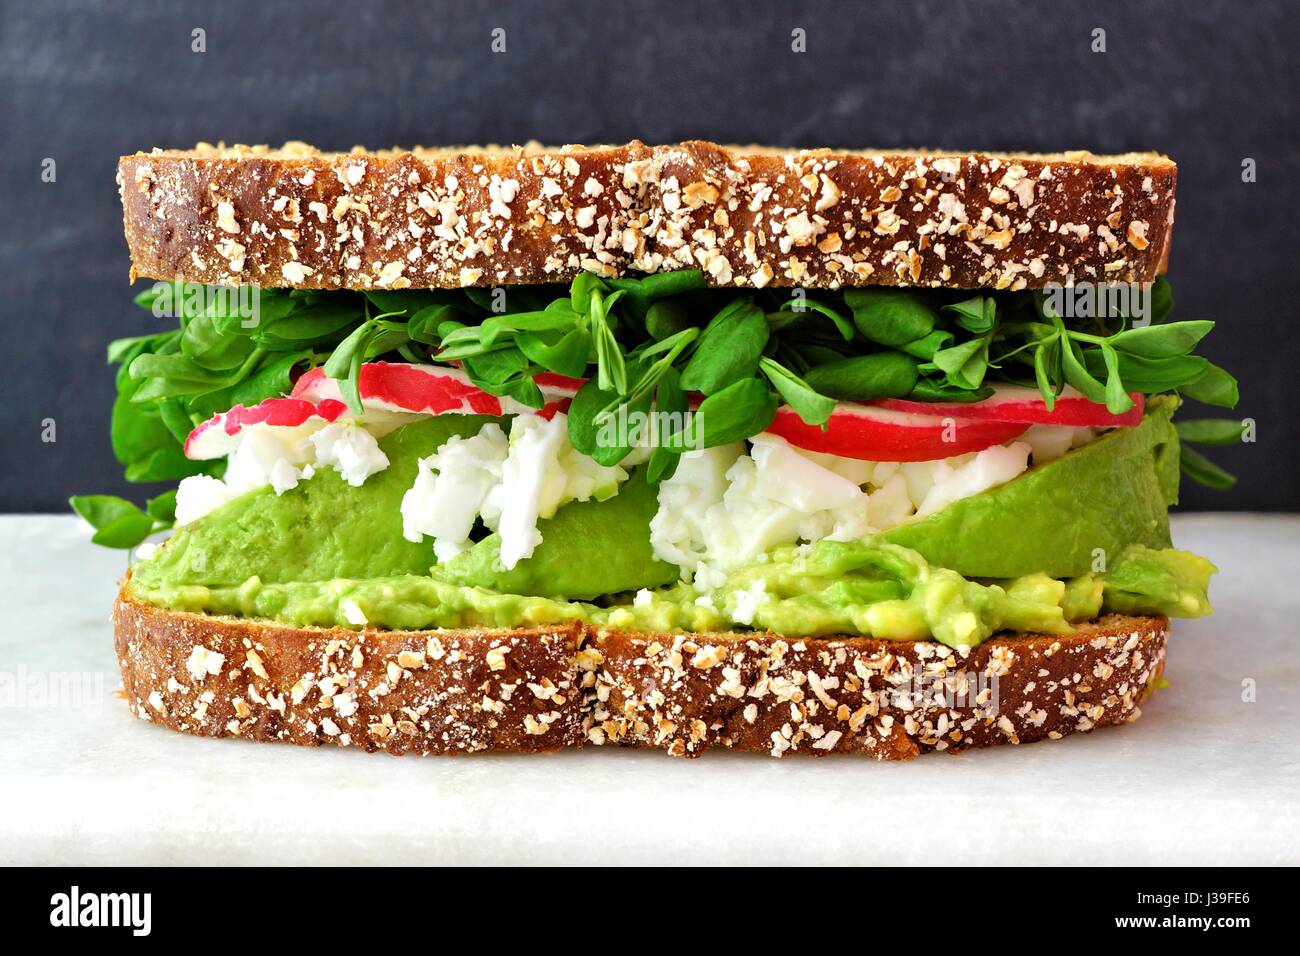 Superfood sandwich with whole grain bread, avocado, egg whites, radishes and pea shoots on marble against a black background Stock Photo